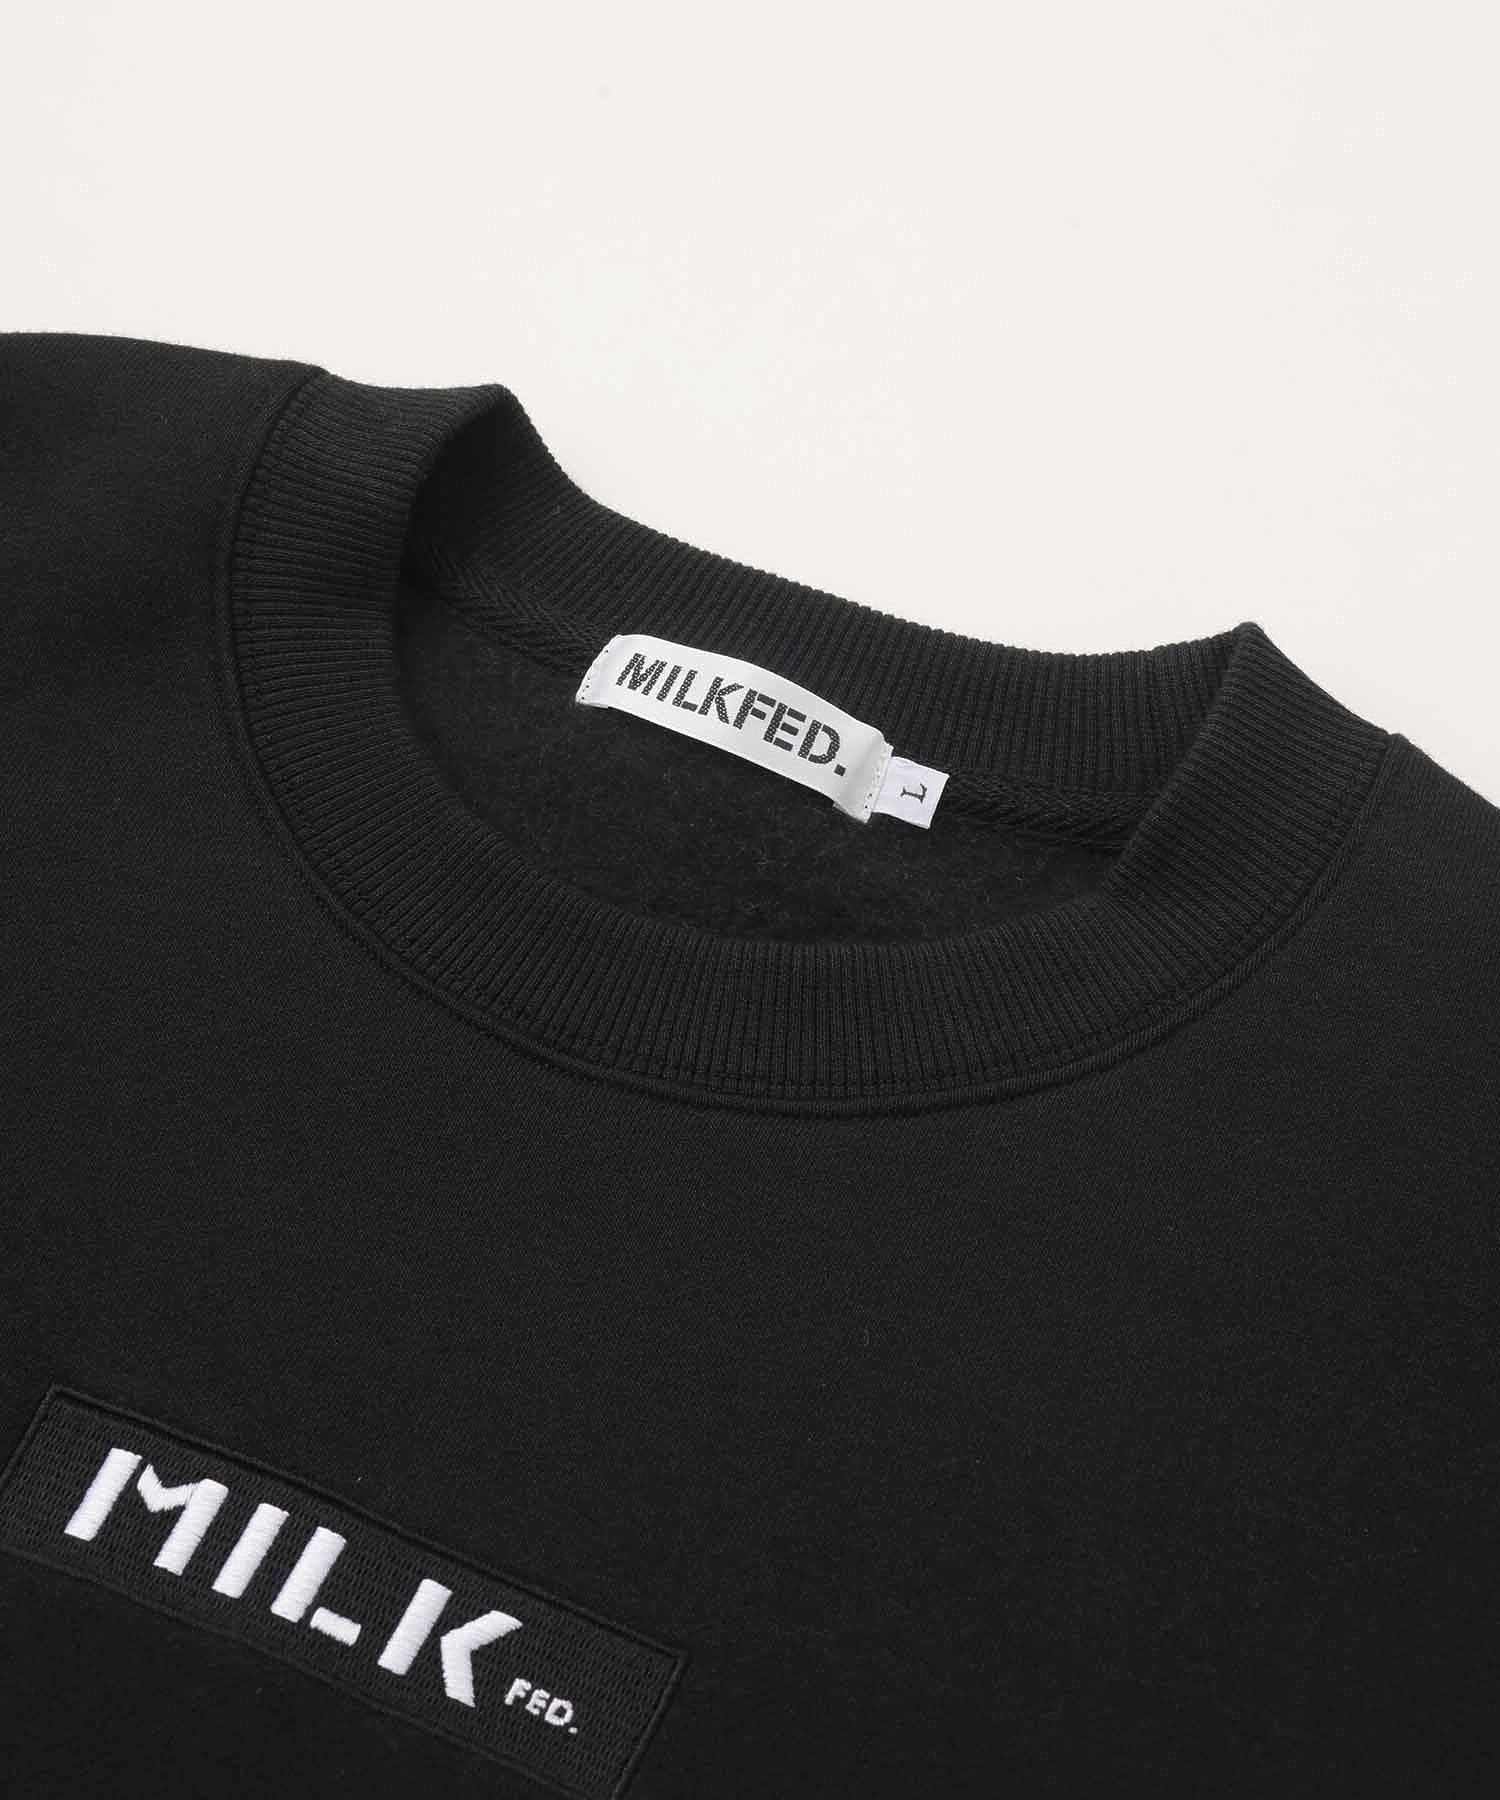 EMBROIDERED BAR SWEAT TOP MILKFED.